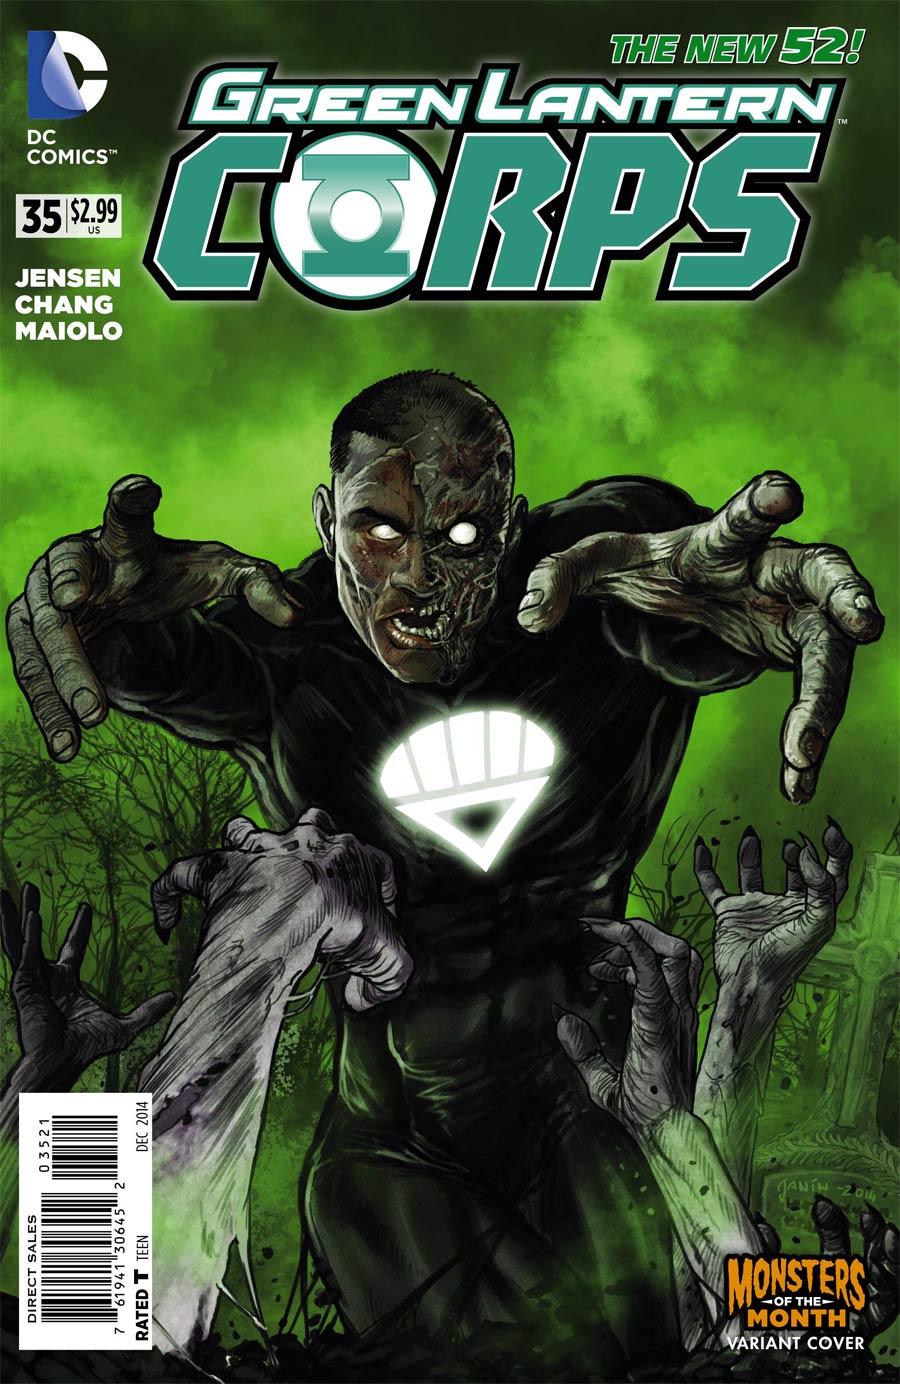 Green Lantern Corps Vol 3 #35 Cover B Variant Mikel Janin Monsters Cover (Godhead Act 1 Part 3)